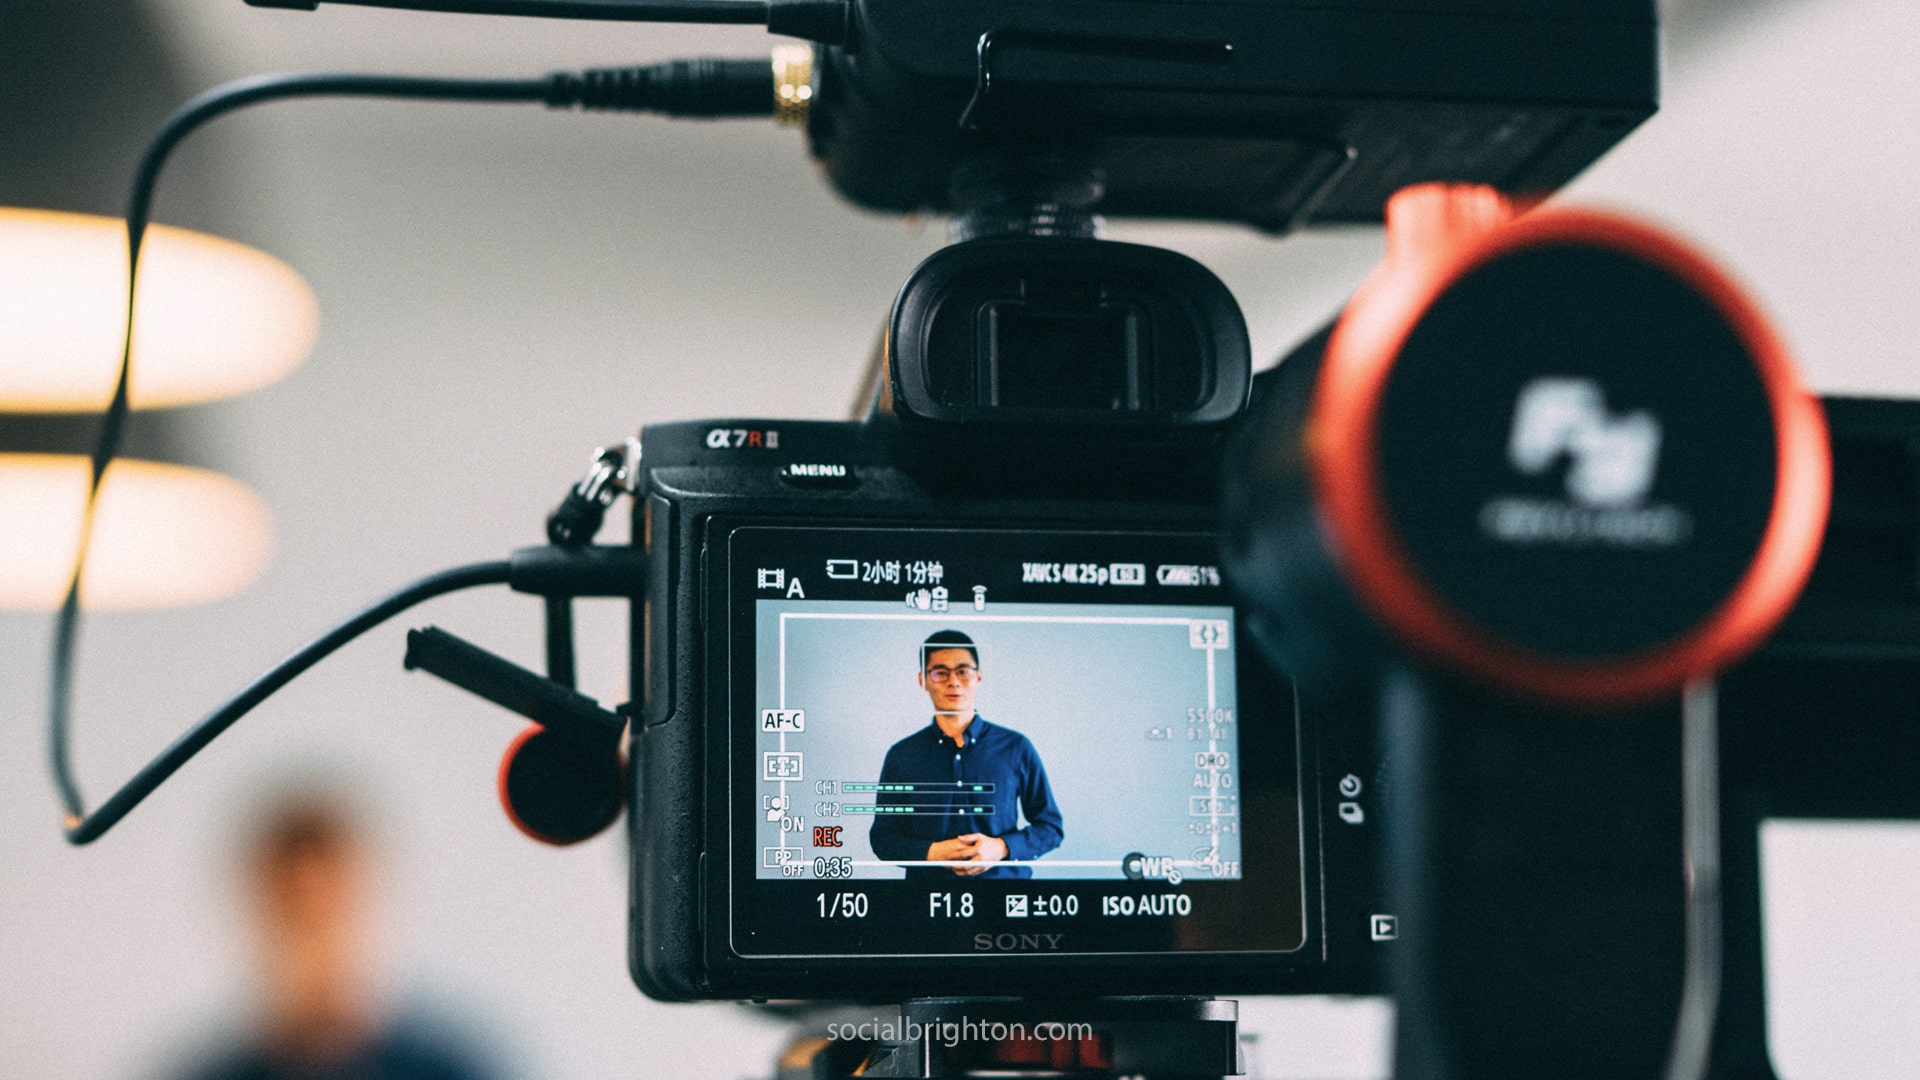 Know more about crowdfunding video production